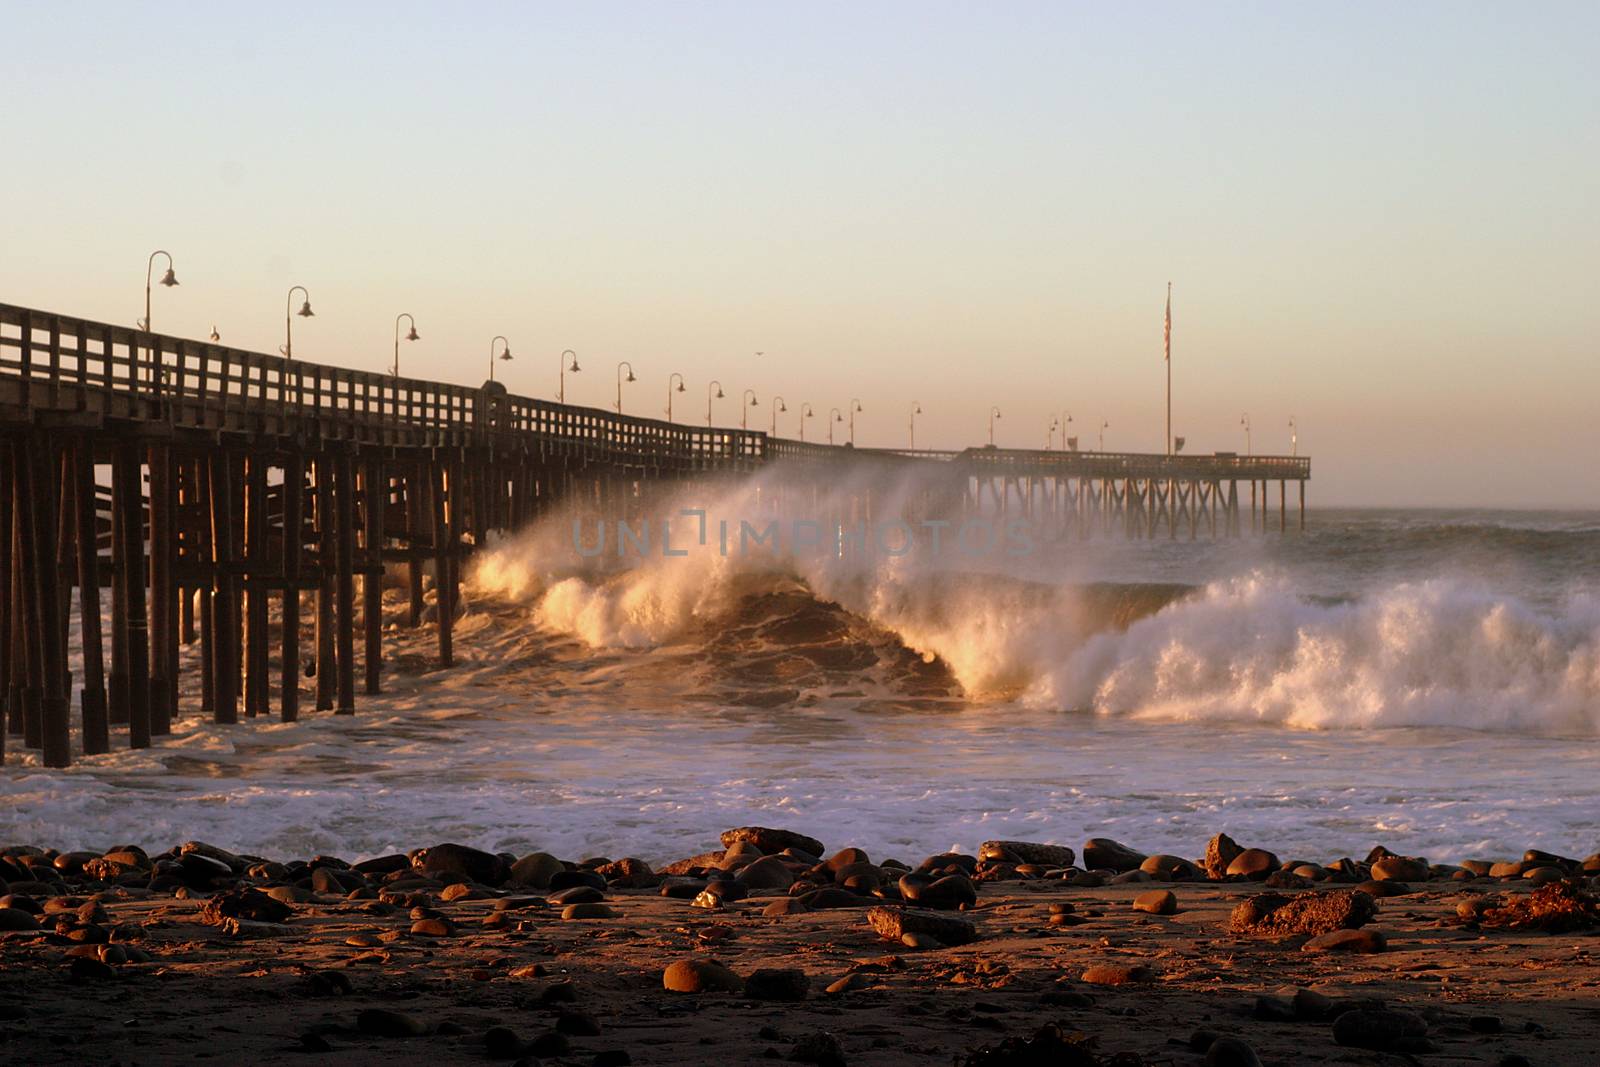 Ocean waves throughout at storm crashing into the wooden Ventura pier.